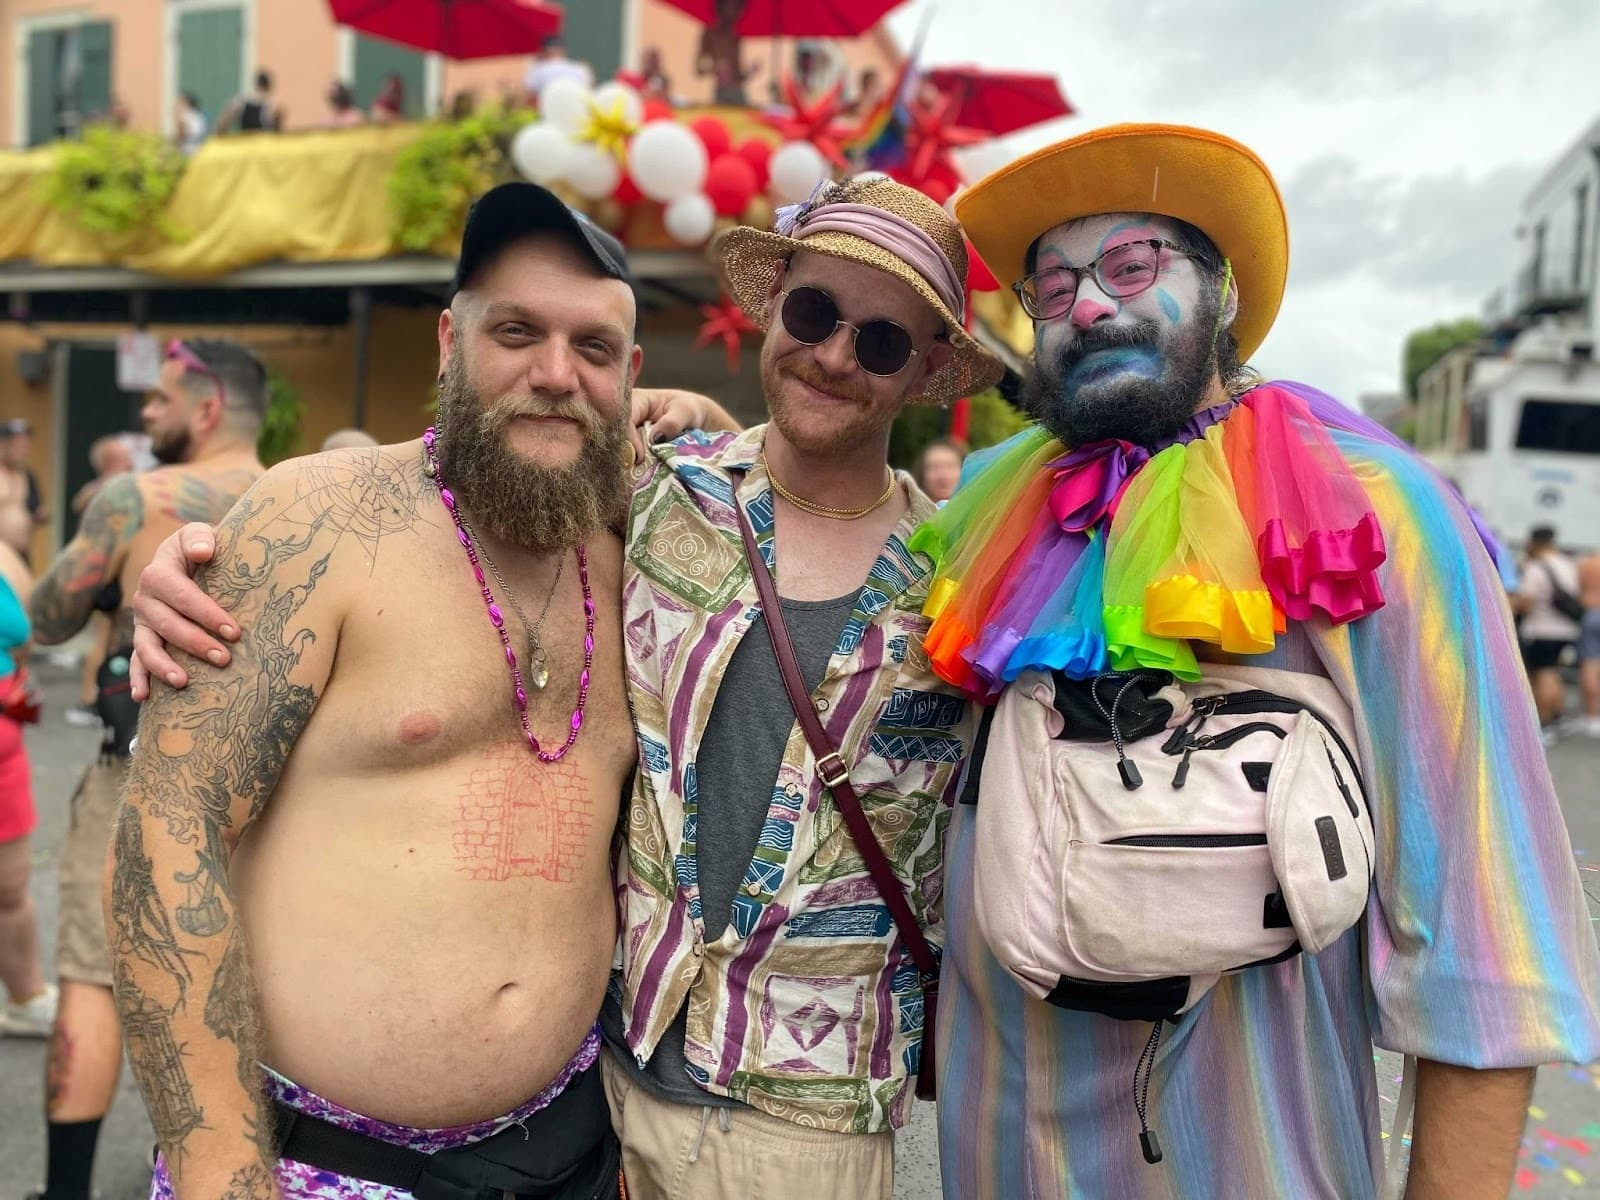 Shea Creel (left), Jae Hinton (center), and Darryn Johnson (right) stop for a photo in New Orleans’ French Quarter, Sept. 6, 2022. The trio from Lake Charles, Louisiana were excited to come to Southern Decadence and were happy to see positive messaging around monkeypox vaccinations. (Shalina Chatlani/ Gulf States Newsroom.)